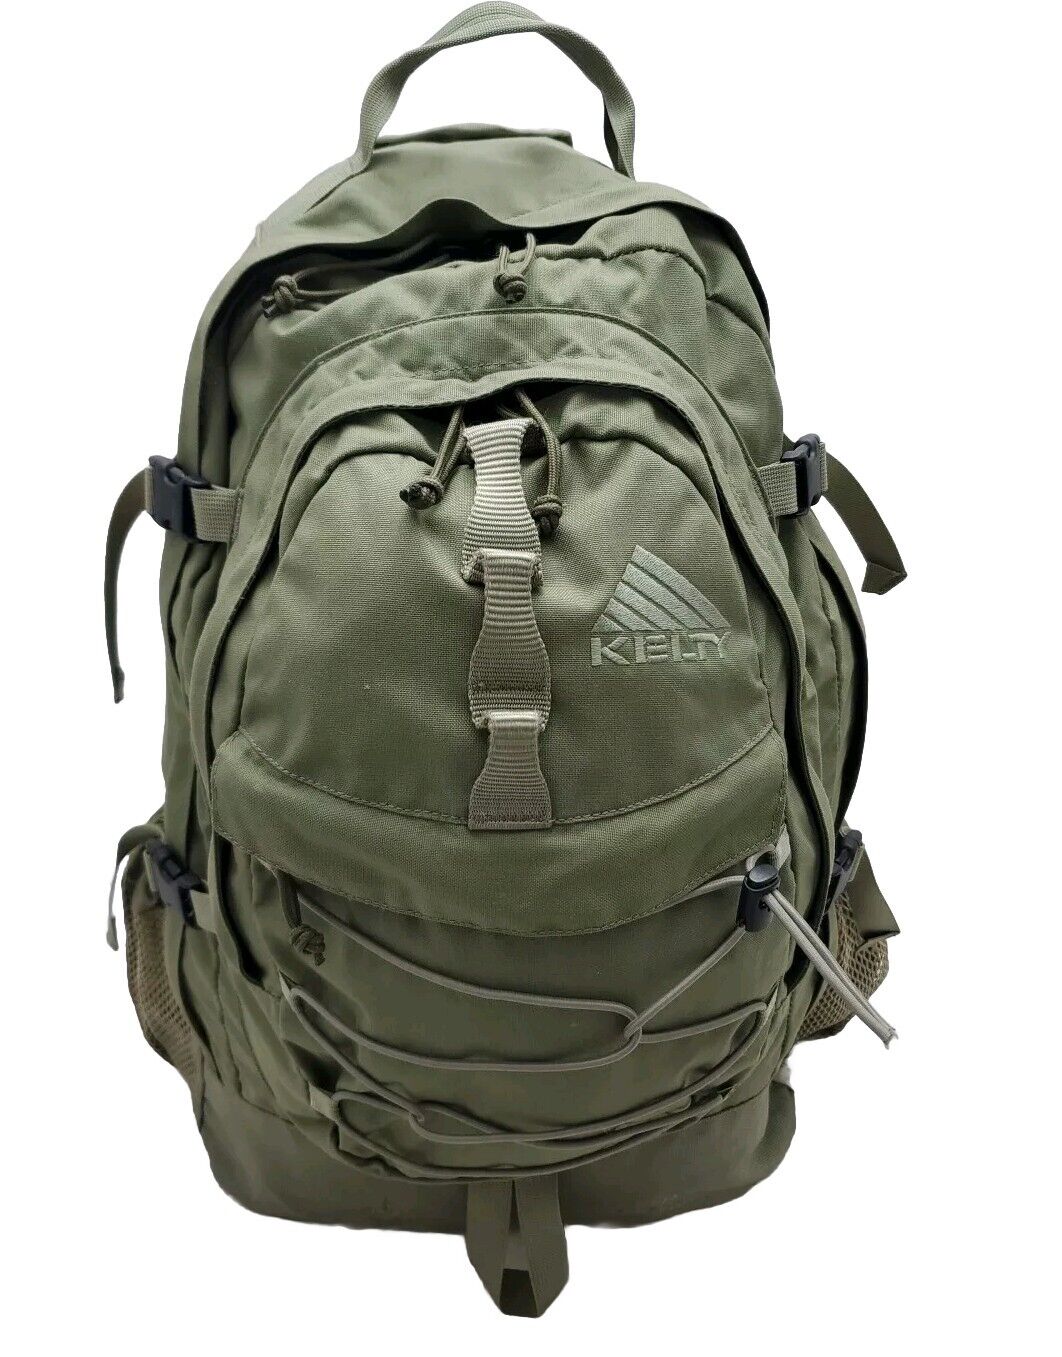 Kelty Amron MAP 3500 Backpack Army Green 3 Day Assault Pack 